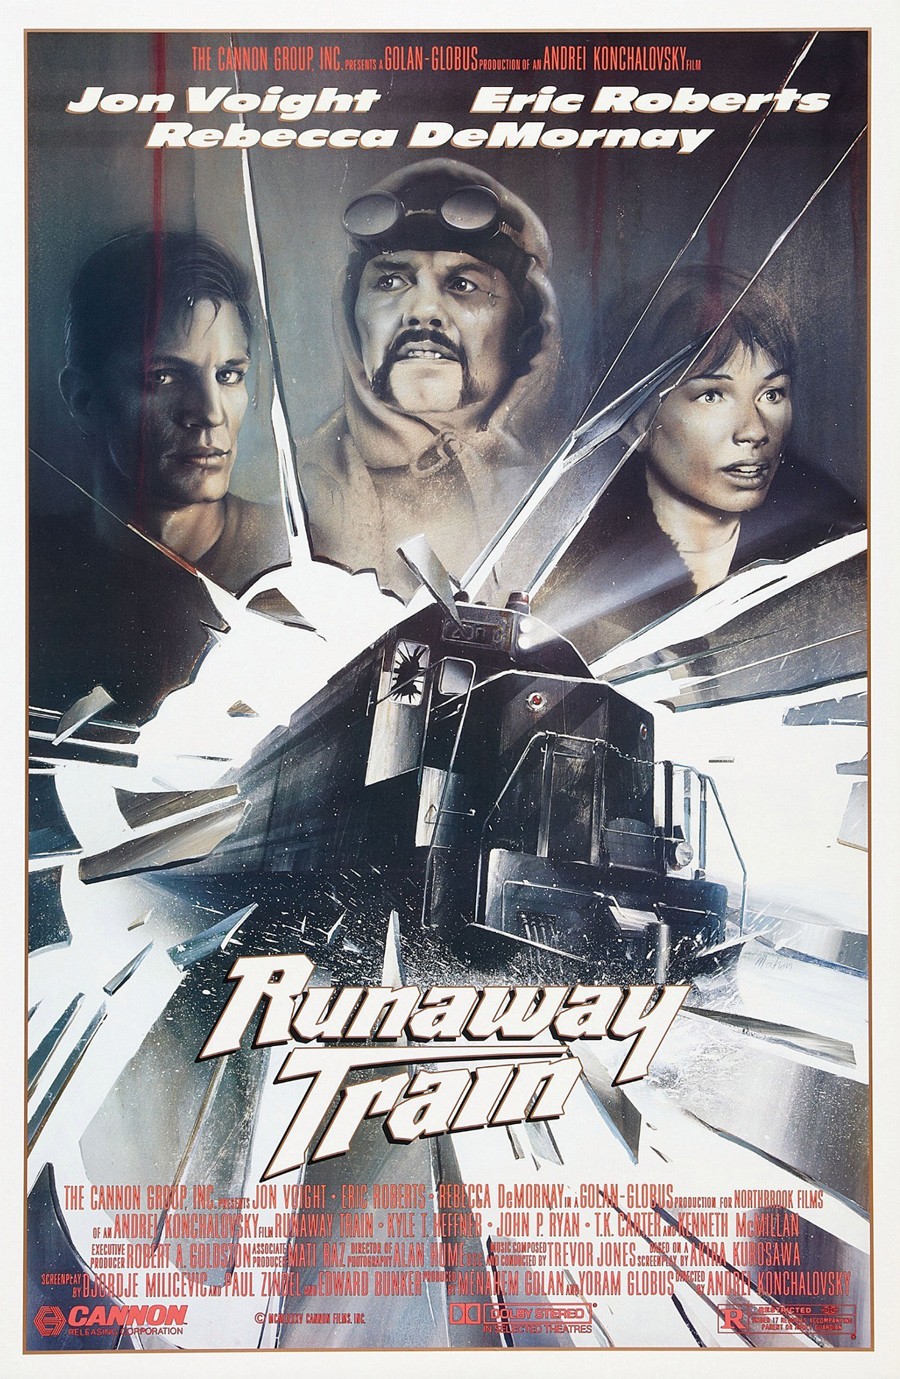 FAIRMONT: Movie and Discussion "Runaway Train" 